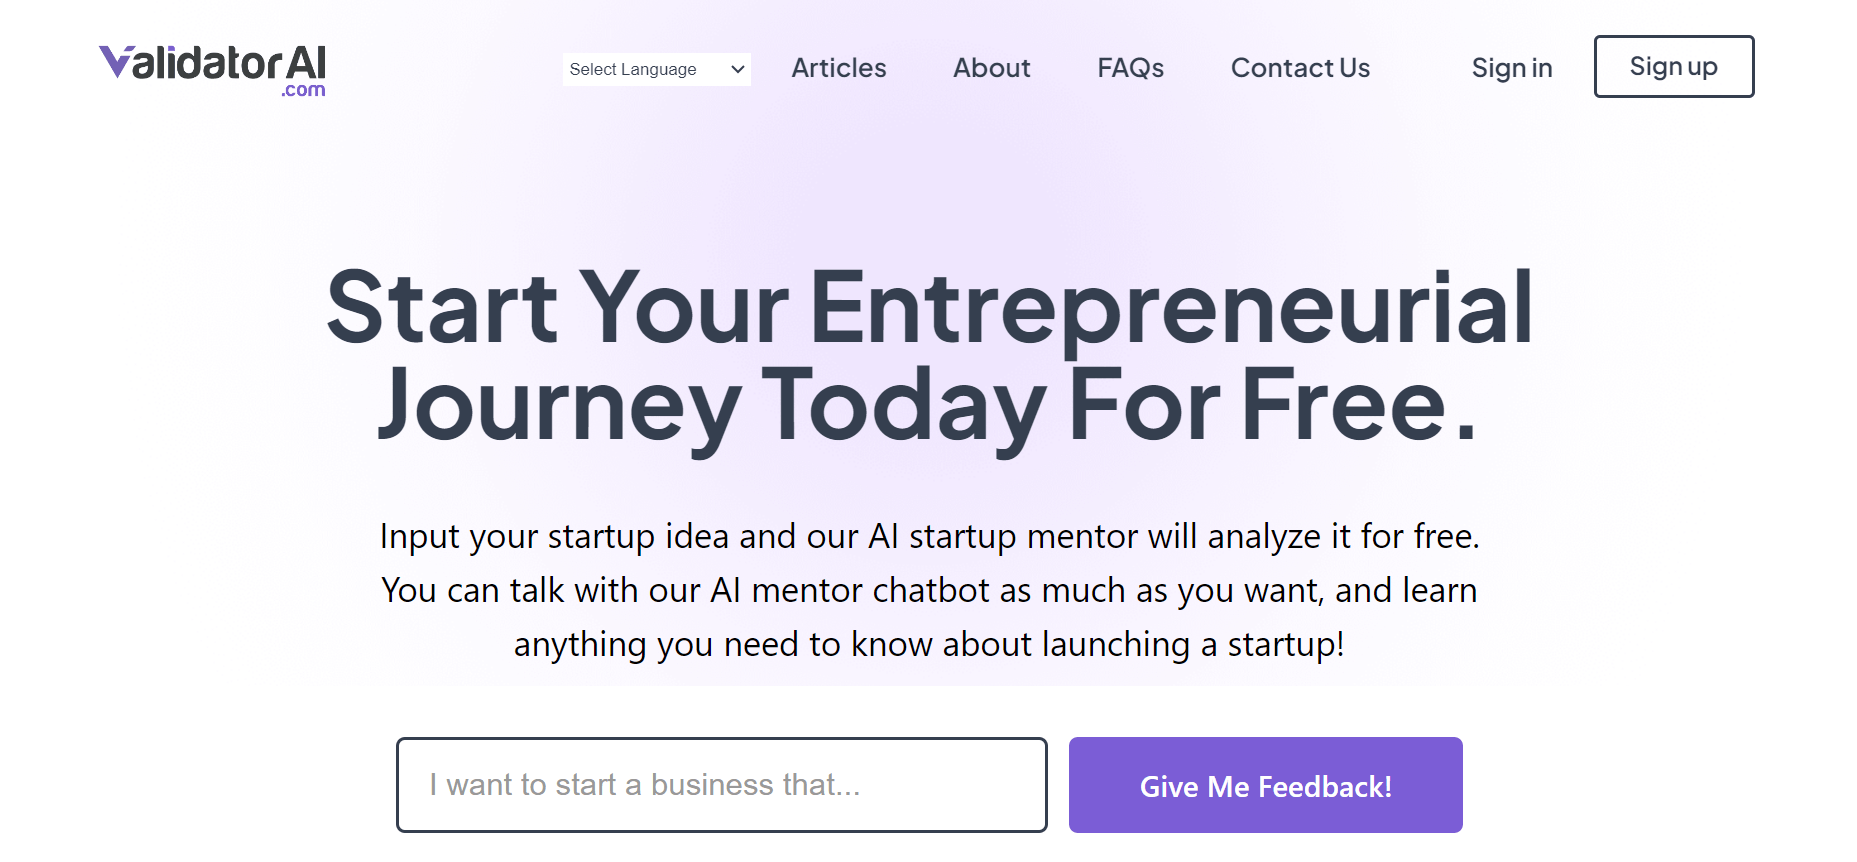 Validator AI - Get Quick Feedback on Your Business Ideas